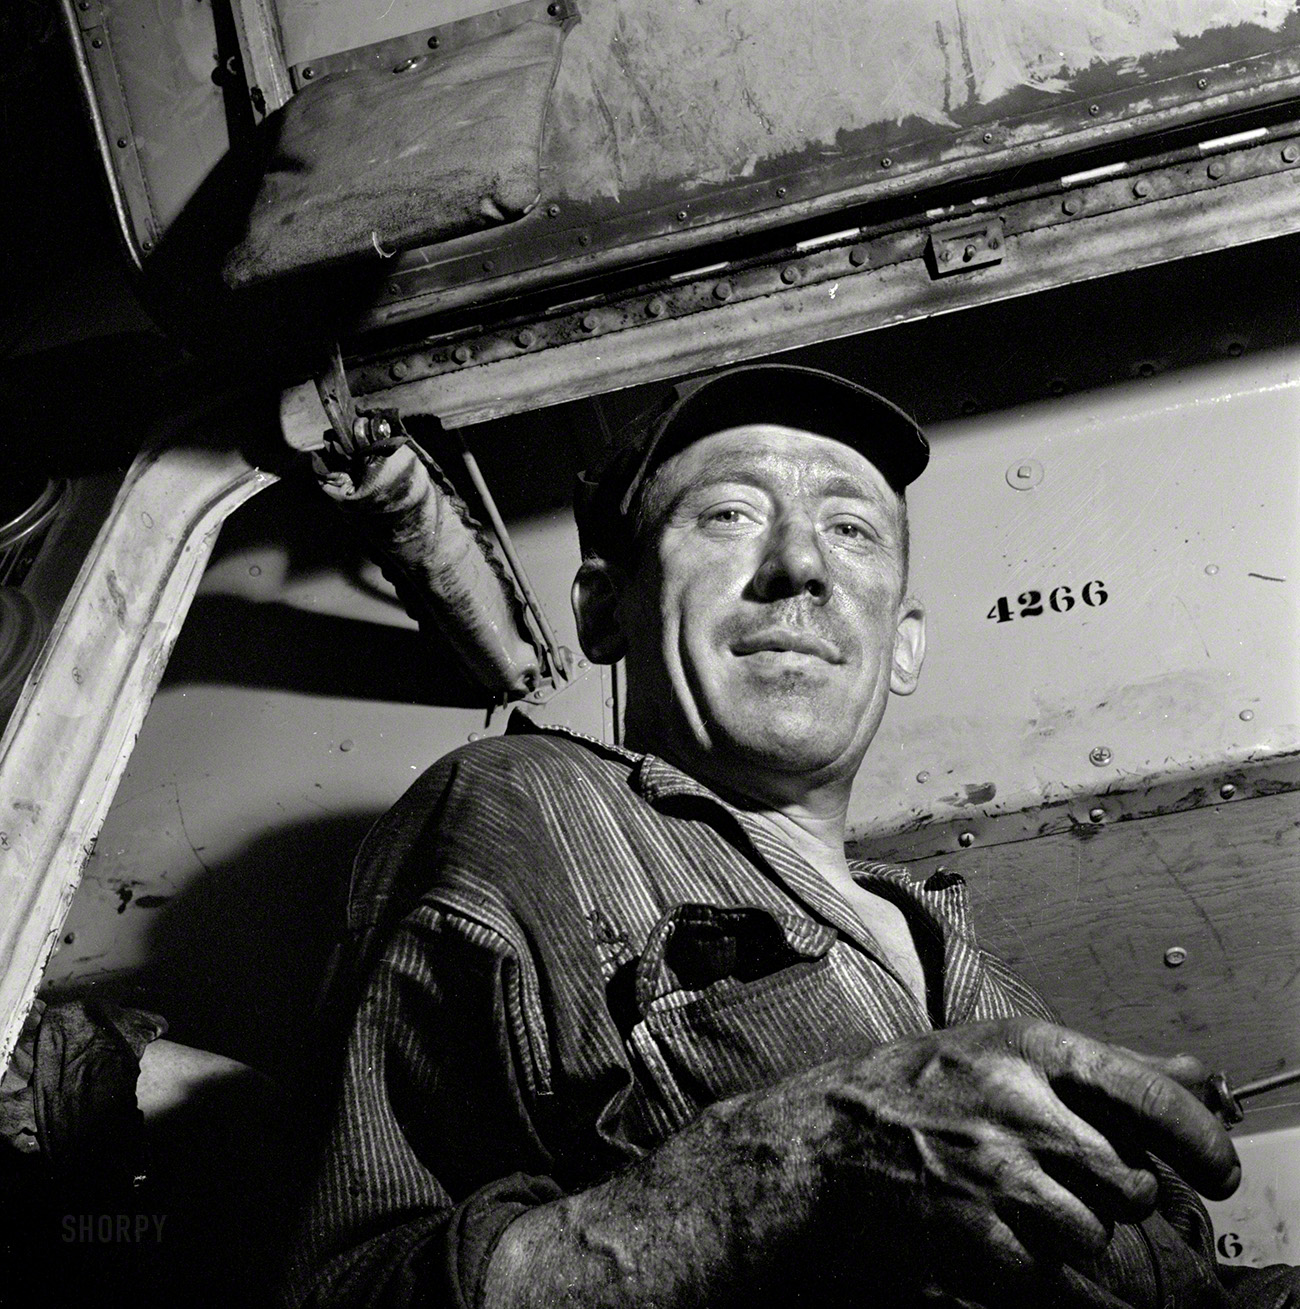 September 1943. Pittsburgh, Pennsylvania. "A mechanic at the Greyhound garage." Photo by Esther Bubley for the Office of War Information. View full size.